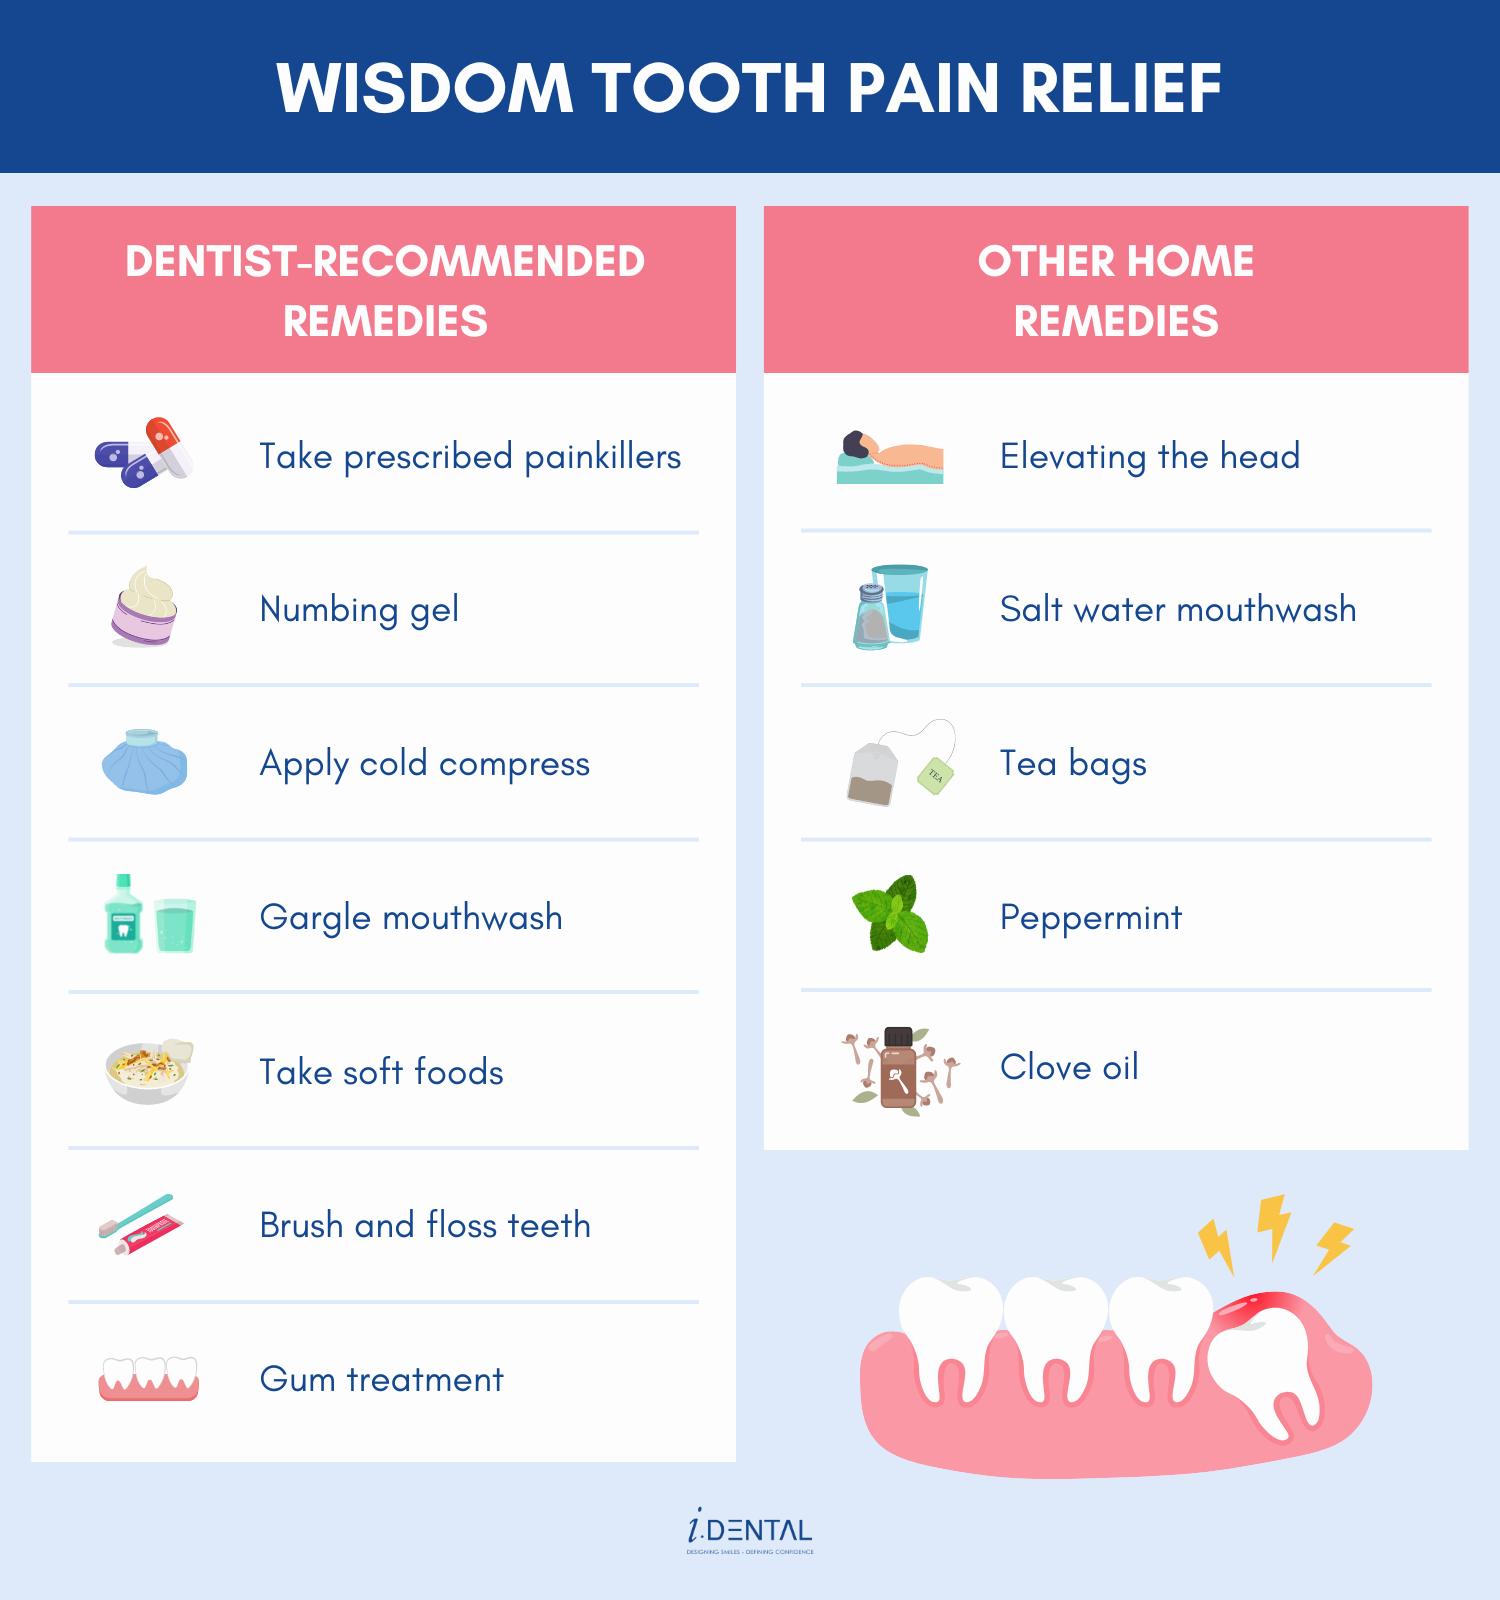 A chart contrasting dentist-recommended wisdom tooth pain remedies with other home remedies.